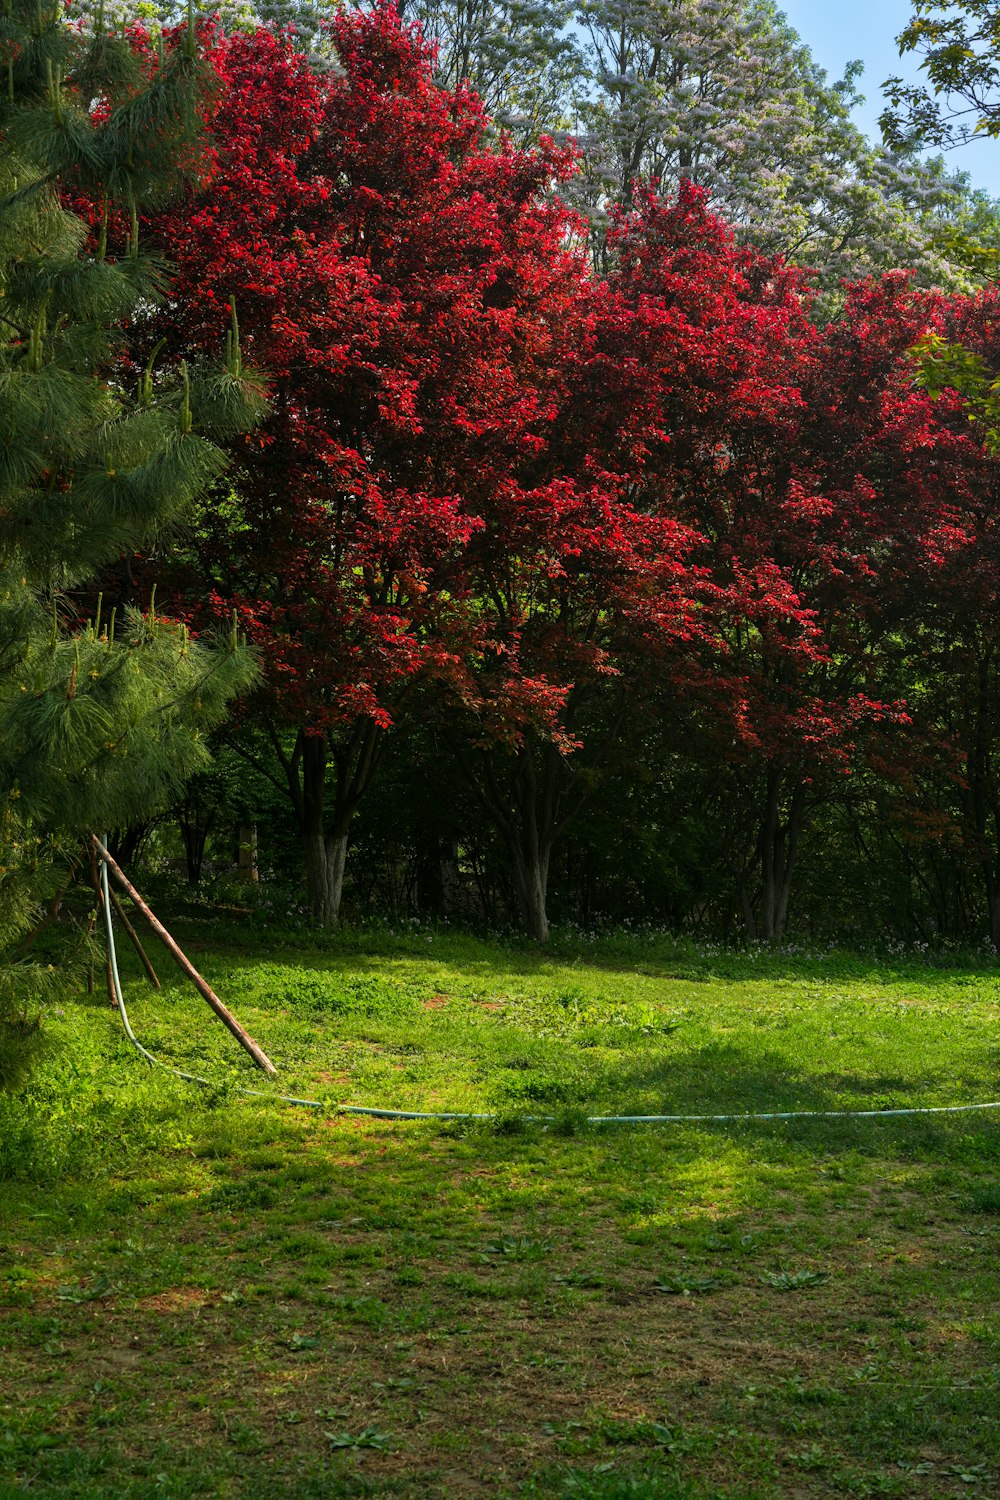 a red tree in the middle of a grassy field